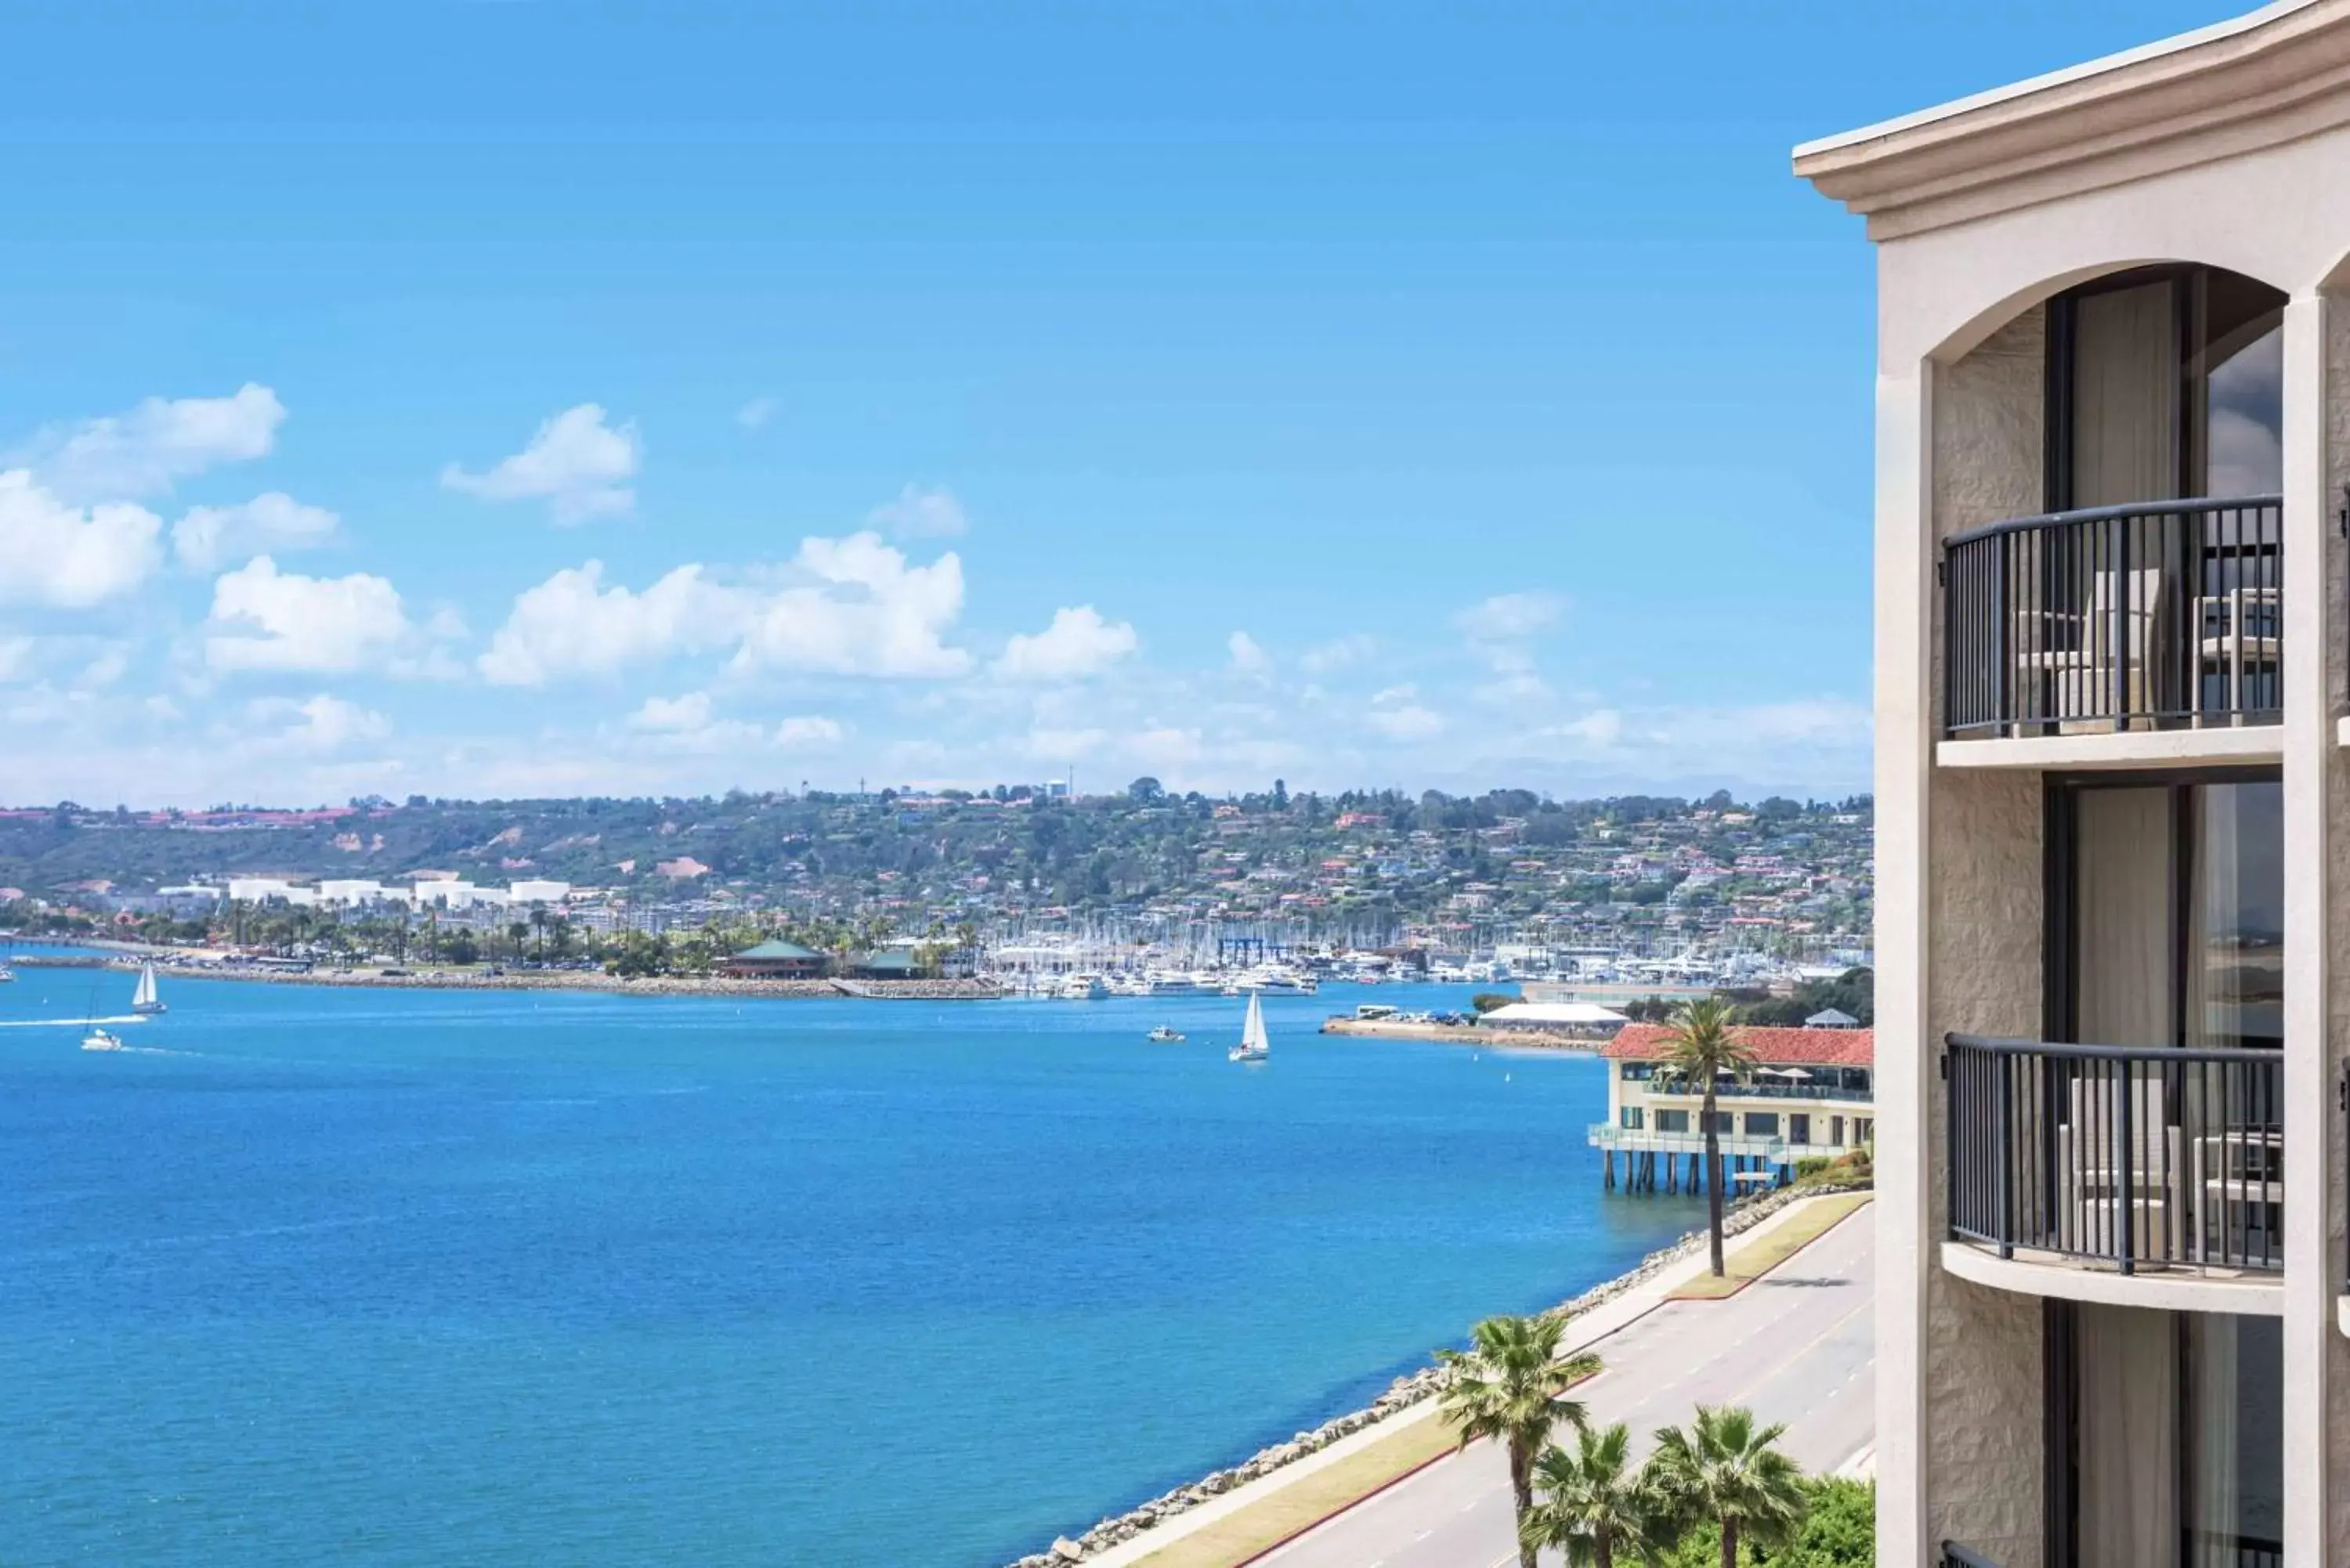 Property building, Sea View in Hilton San Diego Airport/Harbor Island